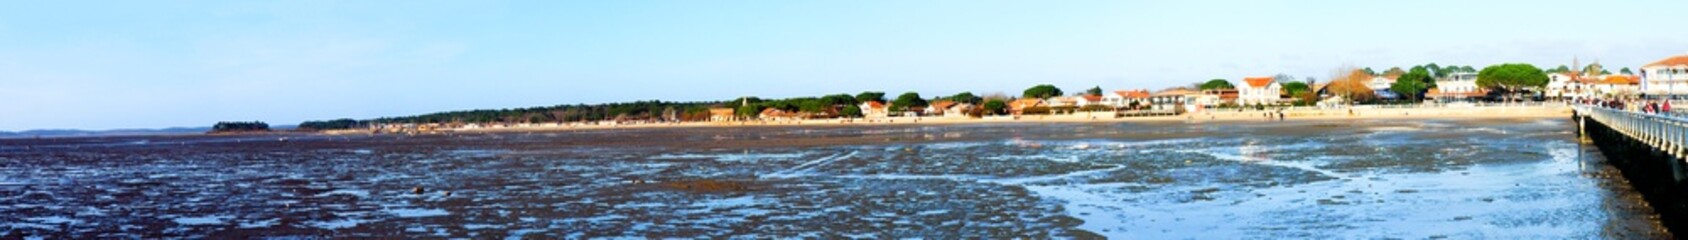 panoramic view of the town of Andernos-les-Bains and the Arcachon bay, from the pontoon, at low tide